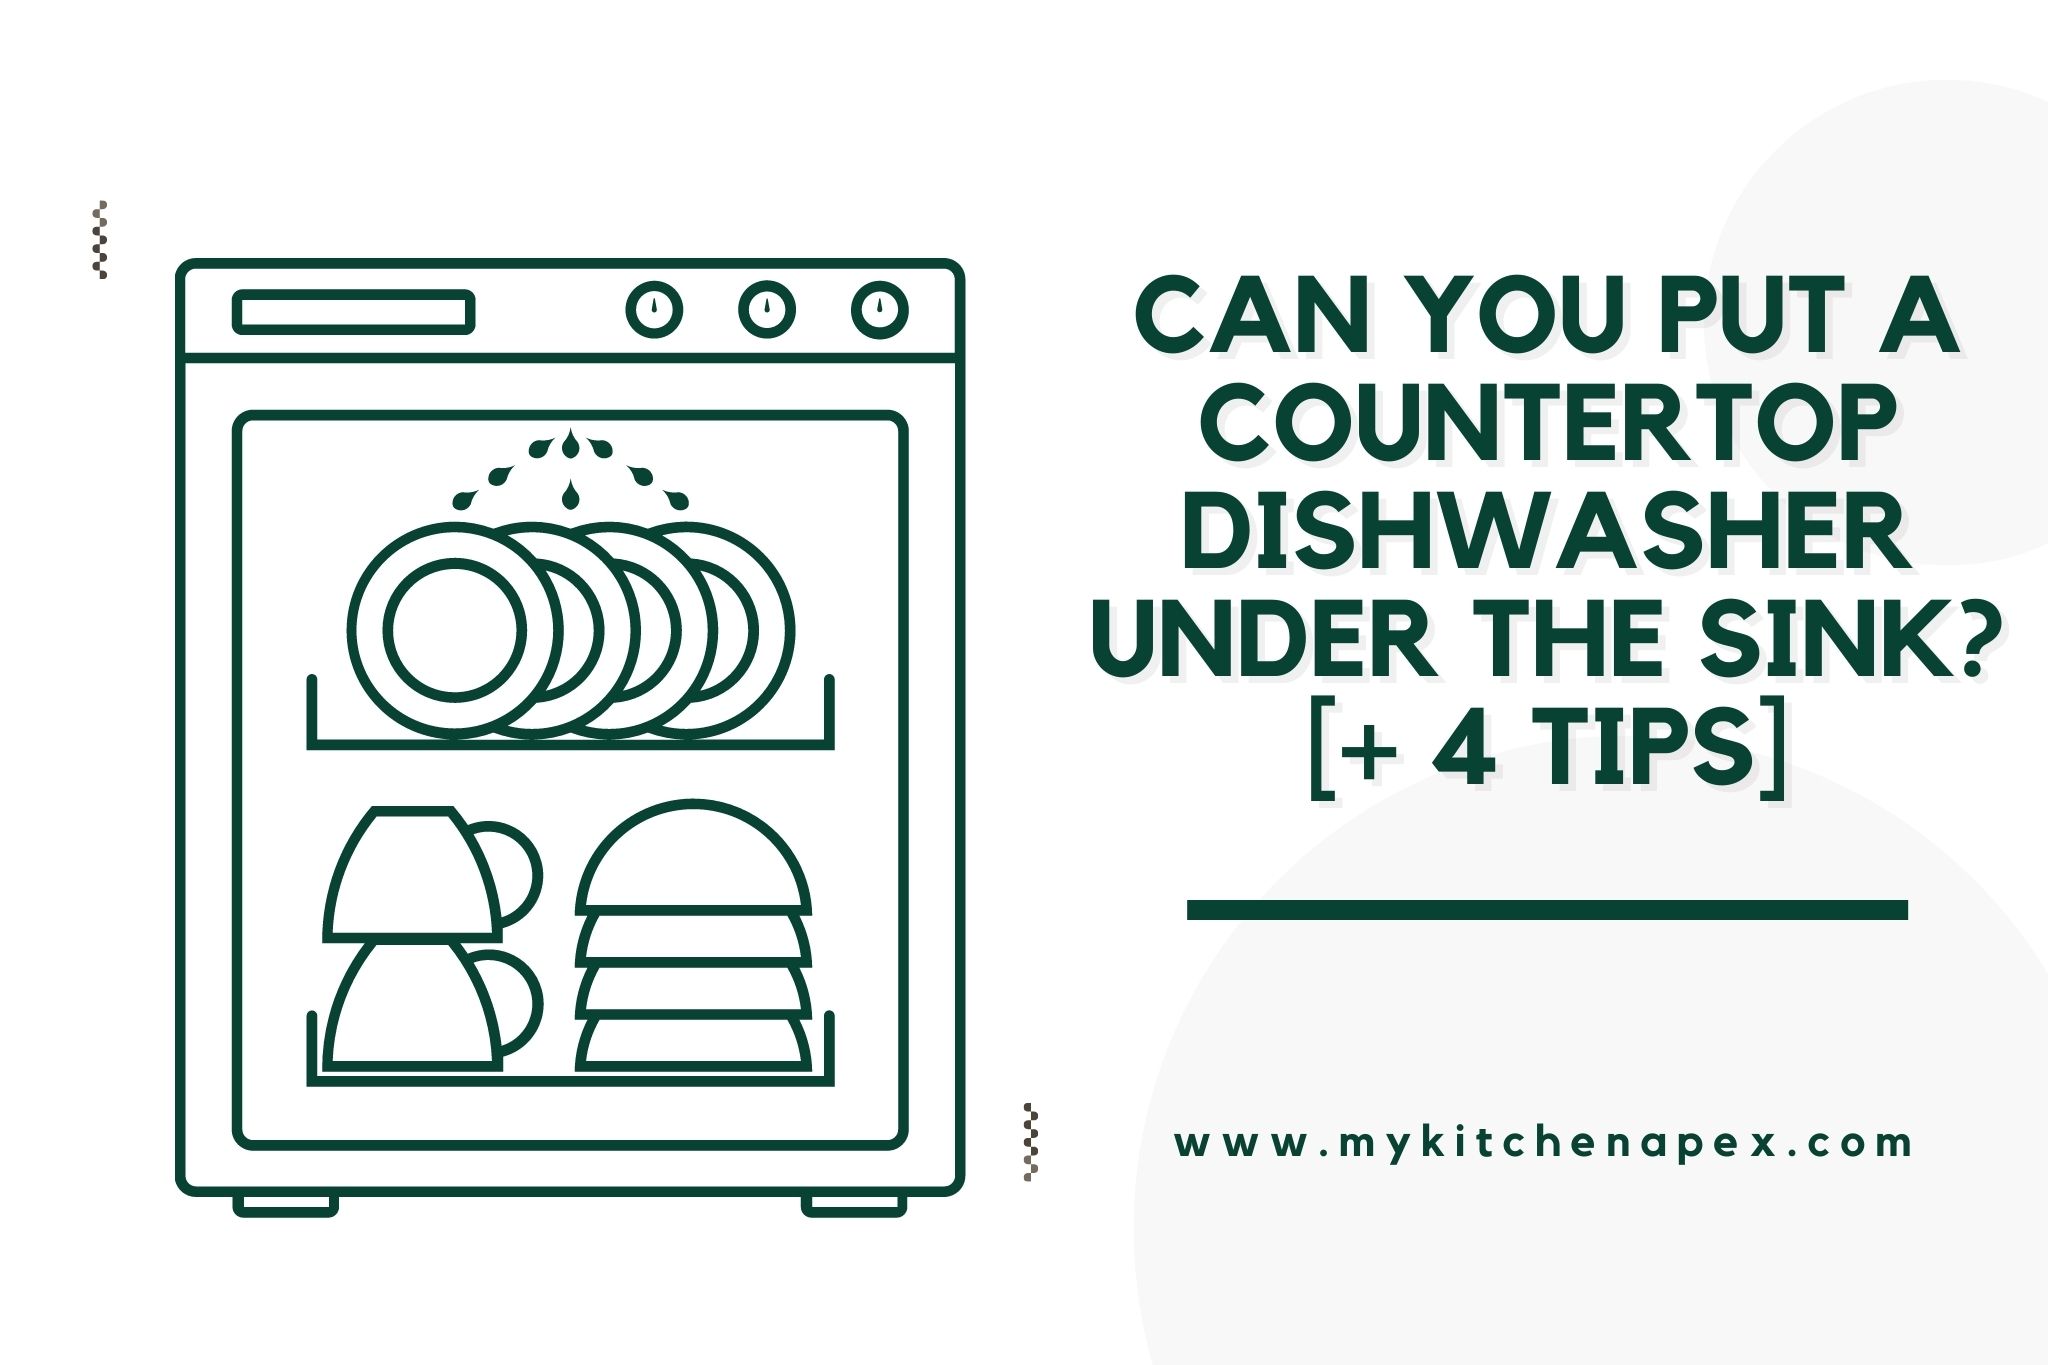 Can You Put A Countertop Dishwasher Under The Sink? [+ 4 TIPS]